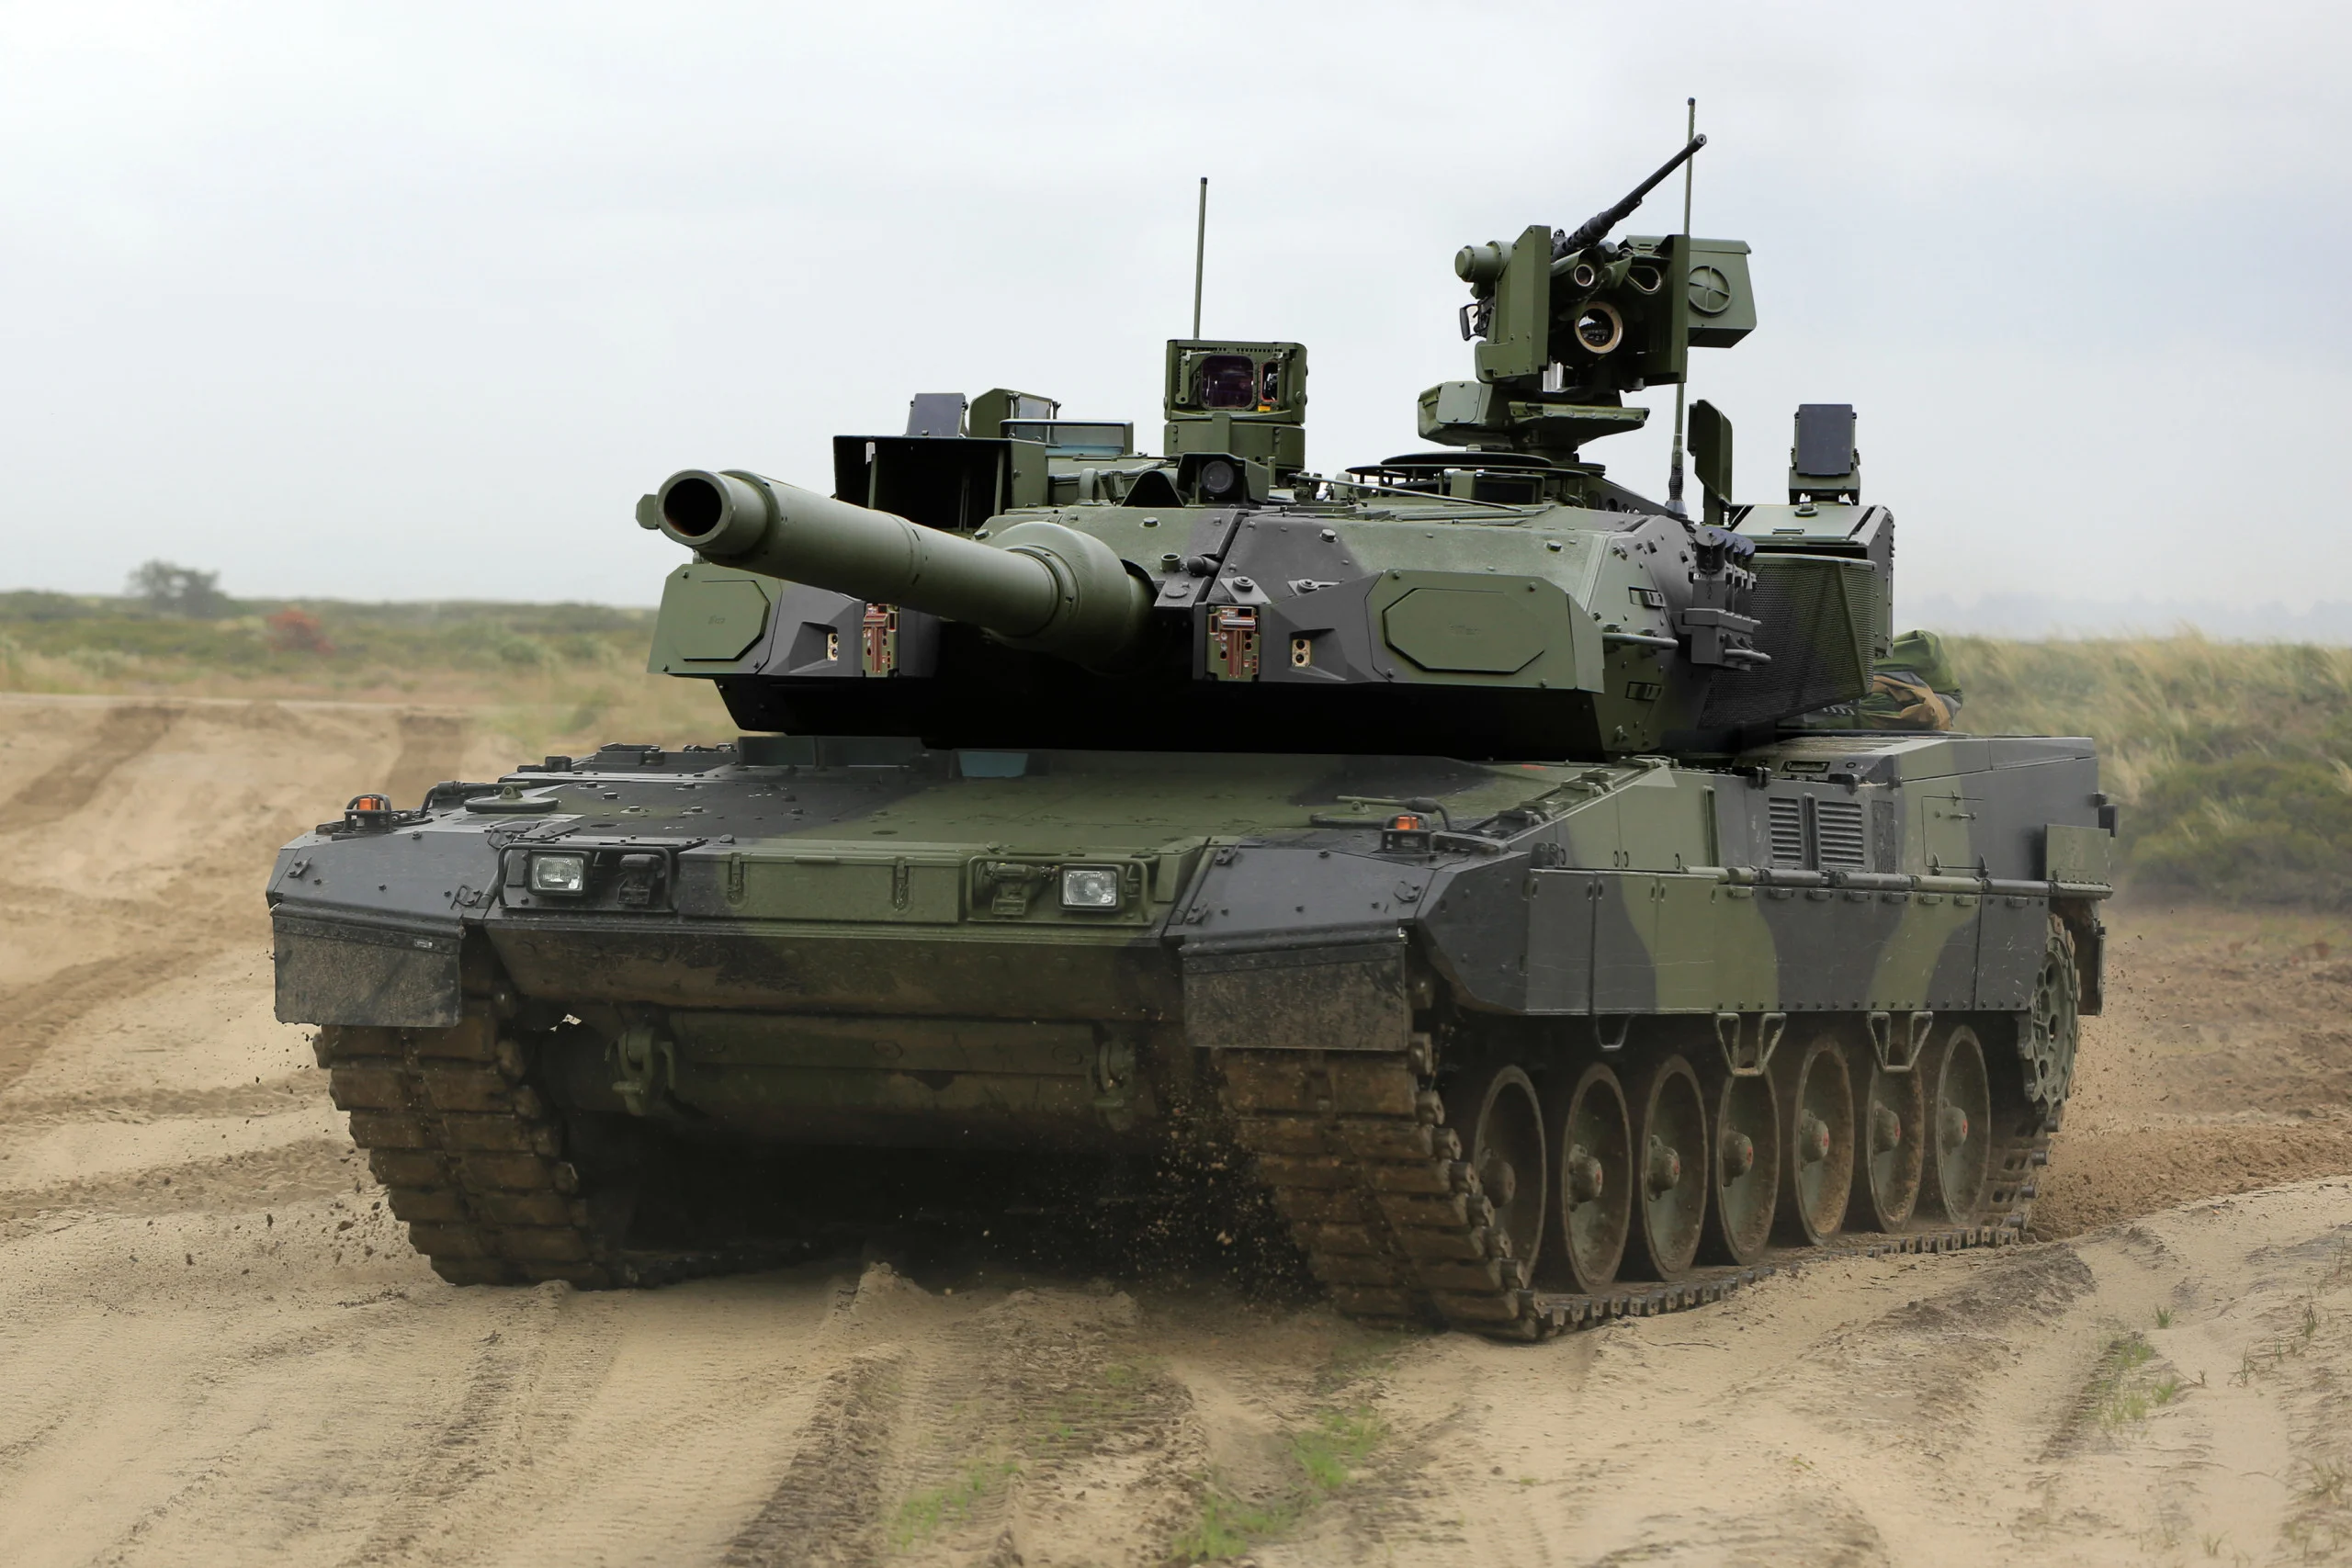 Leopard 2A7+ equipped with КАЗ EuroTrophy and a machine gun combat module